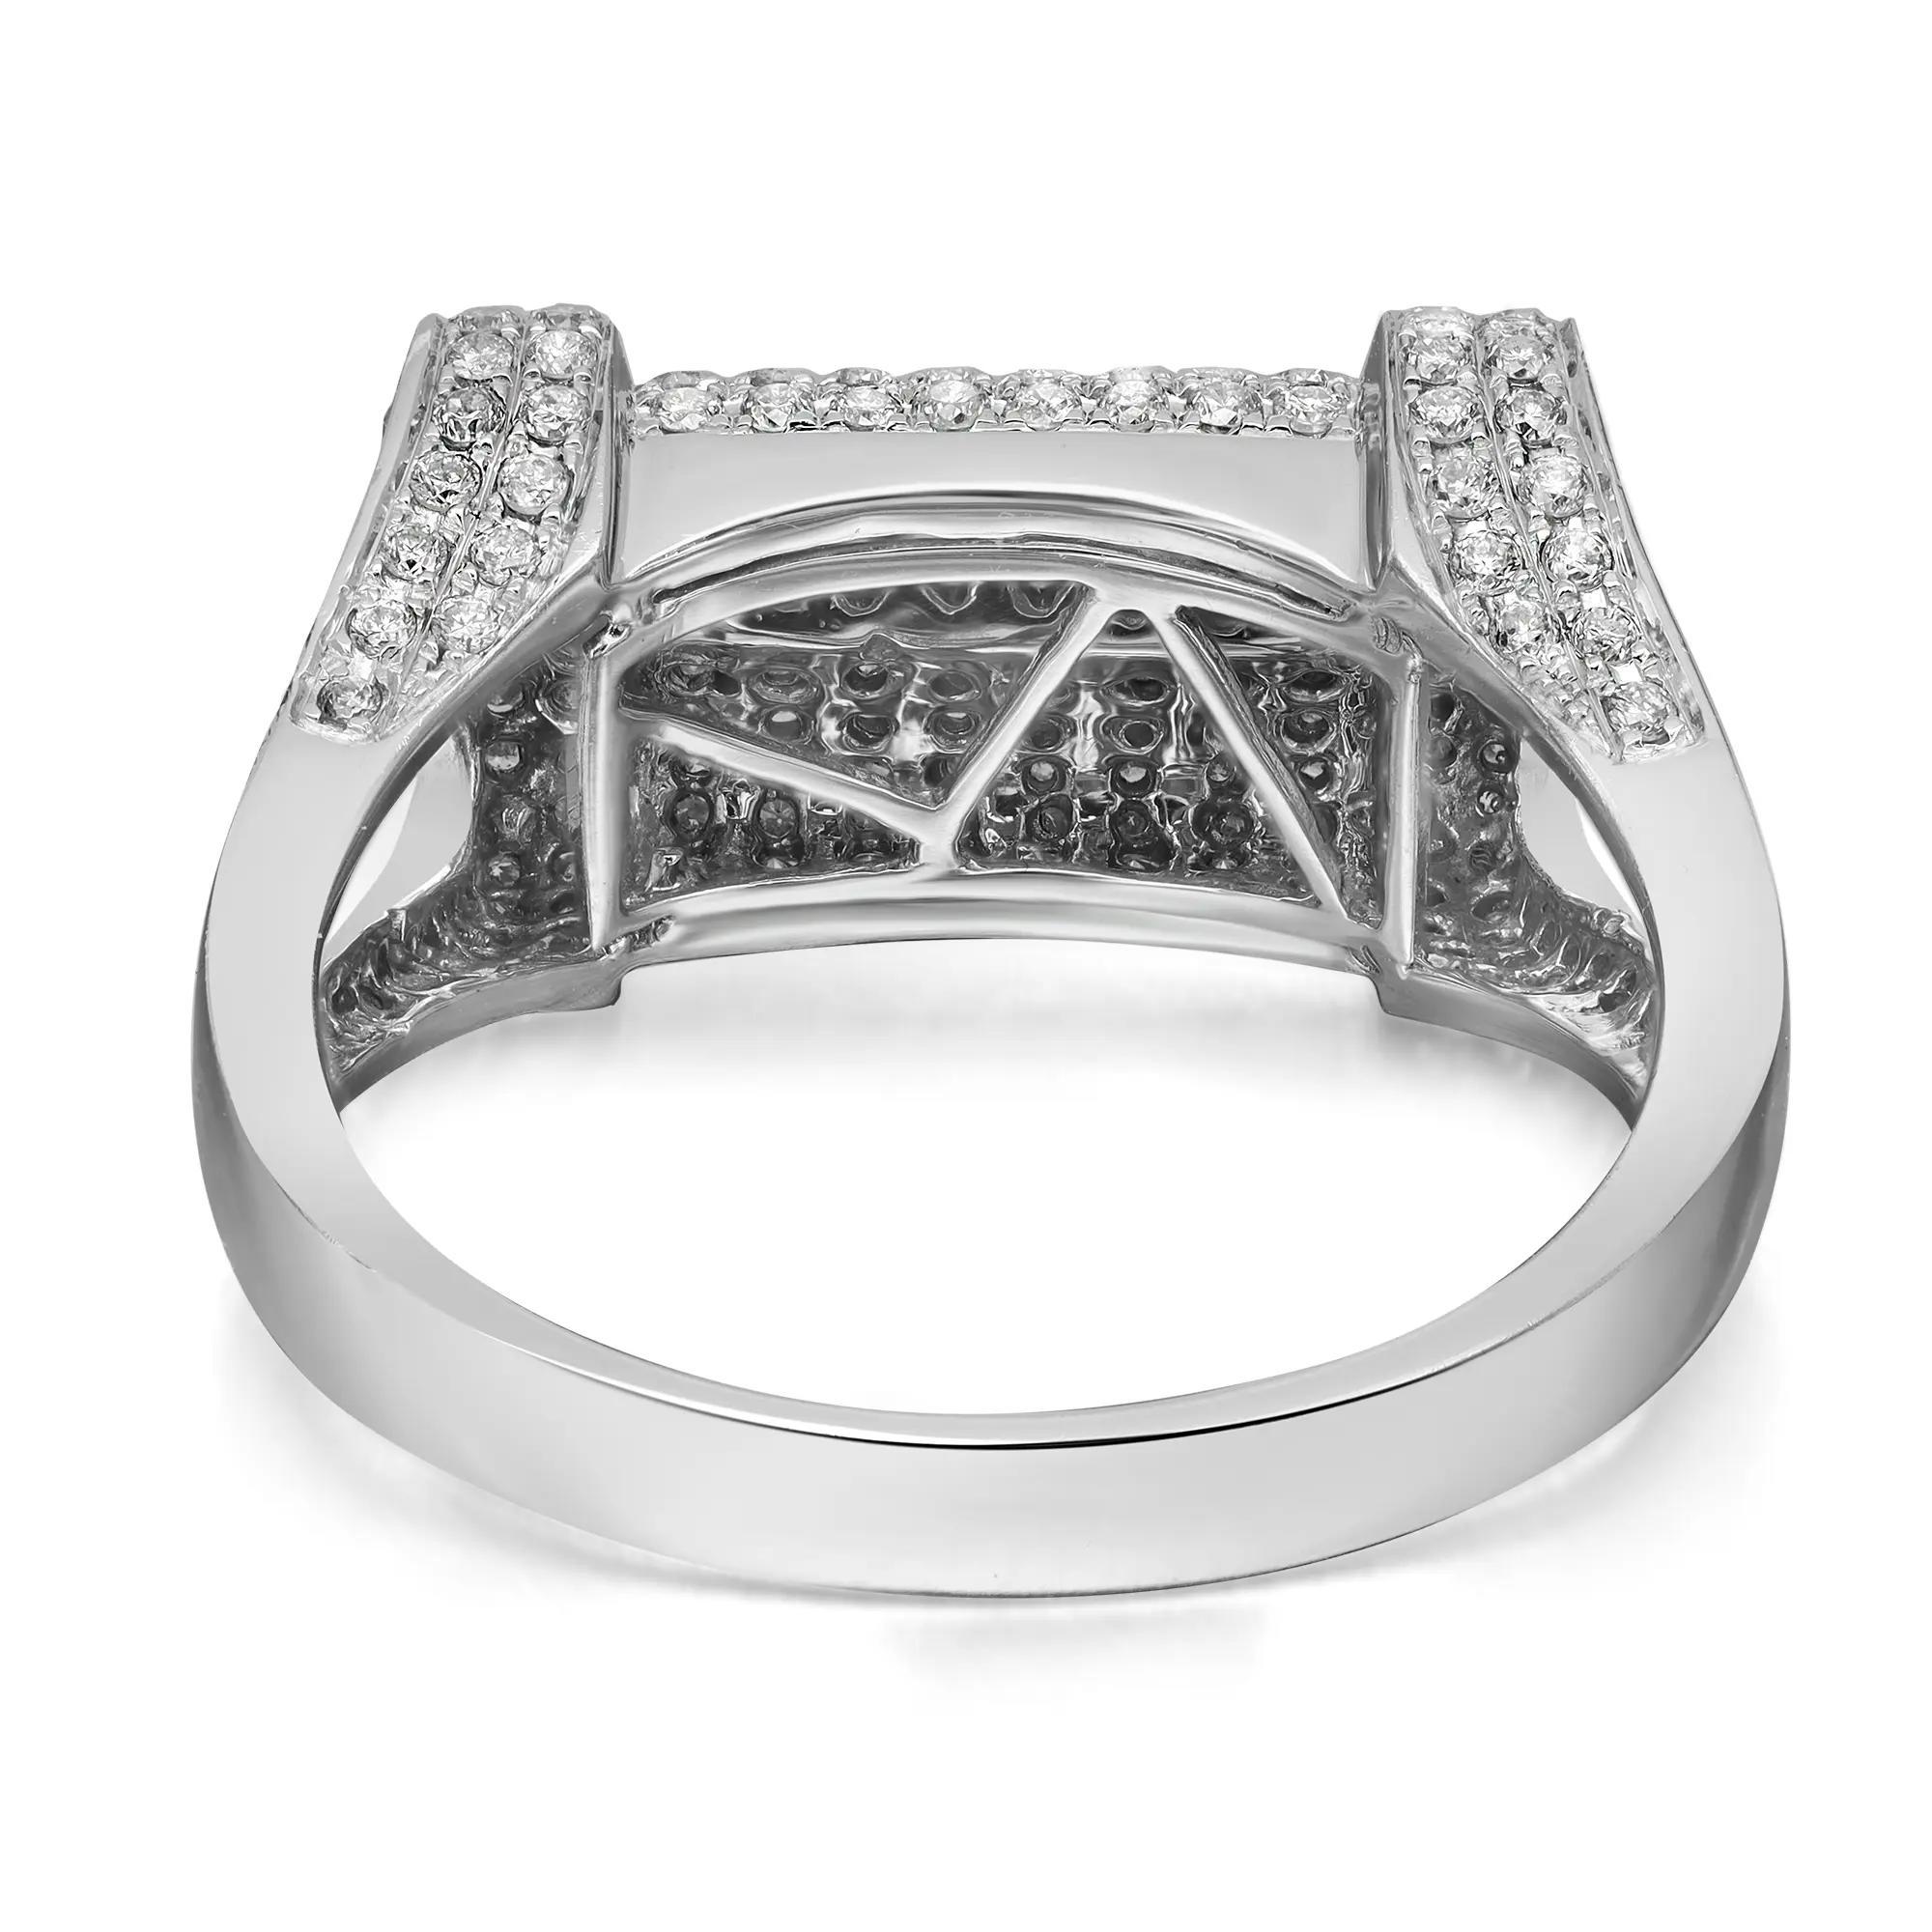 Speak of the bold and beautiful design of this 14k white gold diamond ring band. It features round brilliant cut diamonds encrusted in pave setting. Total diamond weight: 1.28 carat. Diamond quality: I color and SI clarity. Ring size: 10. Total